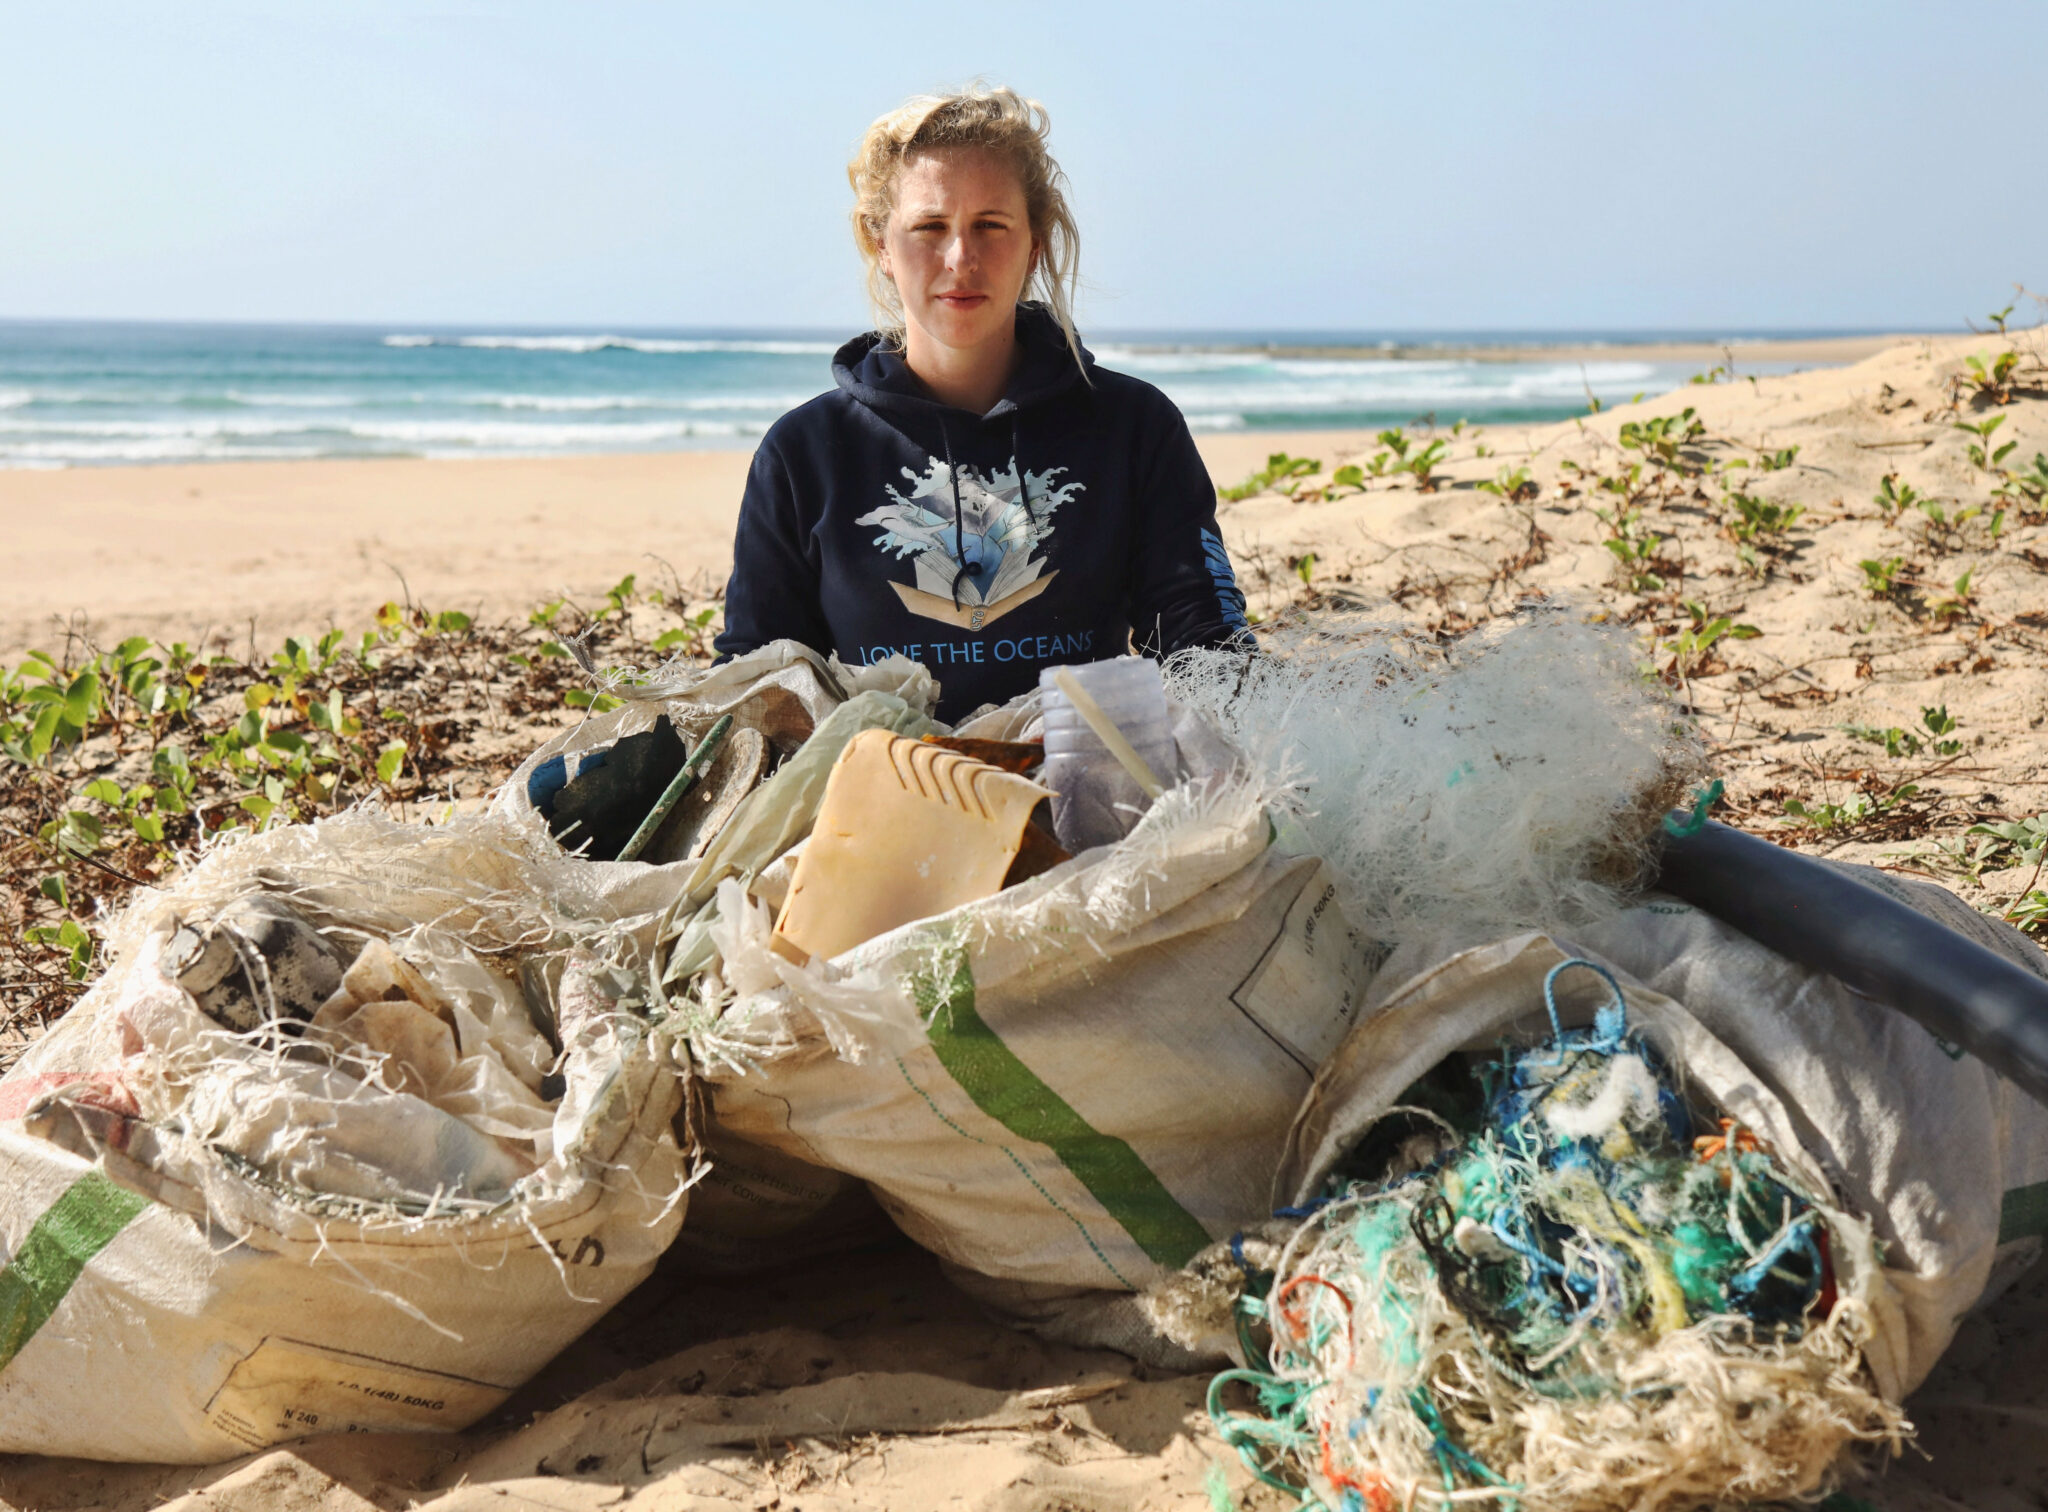 Francesca Trotman sits on a beach with rubbish she has collected